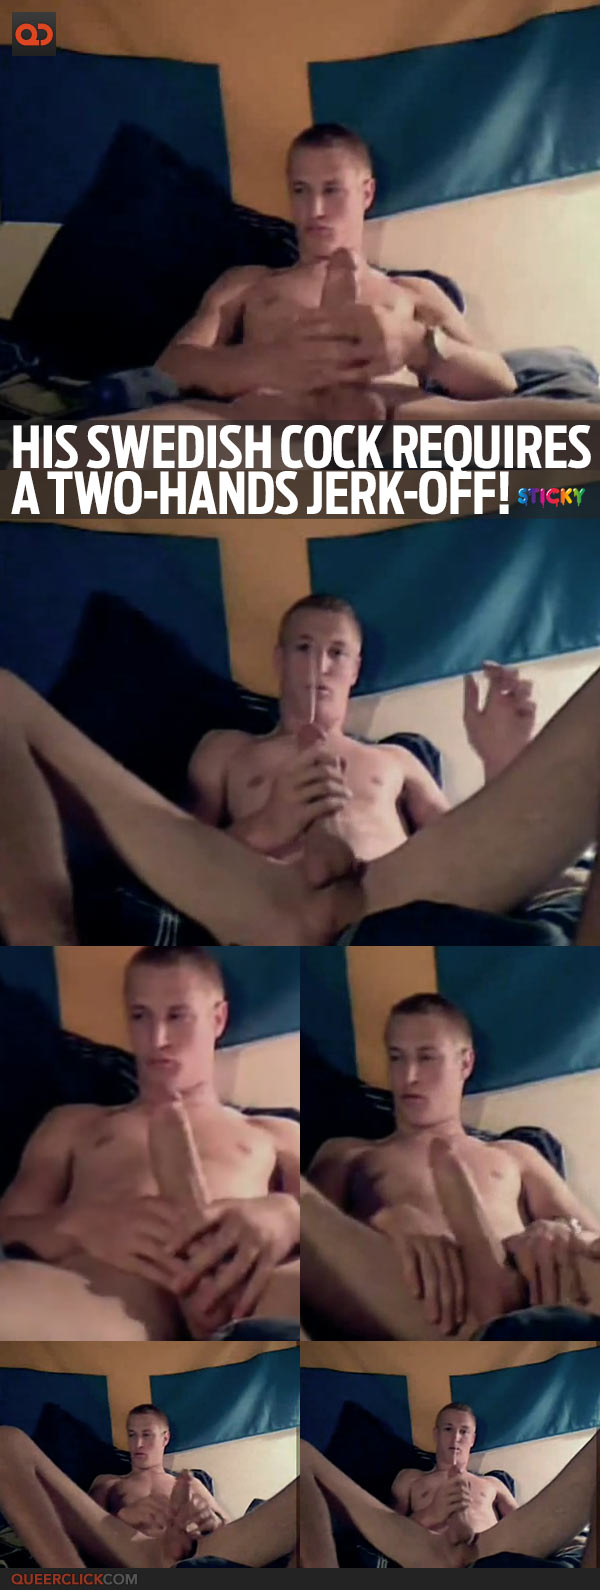 His Swedish Cock Requires A Two-Hands Jerk-off!